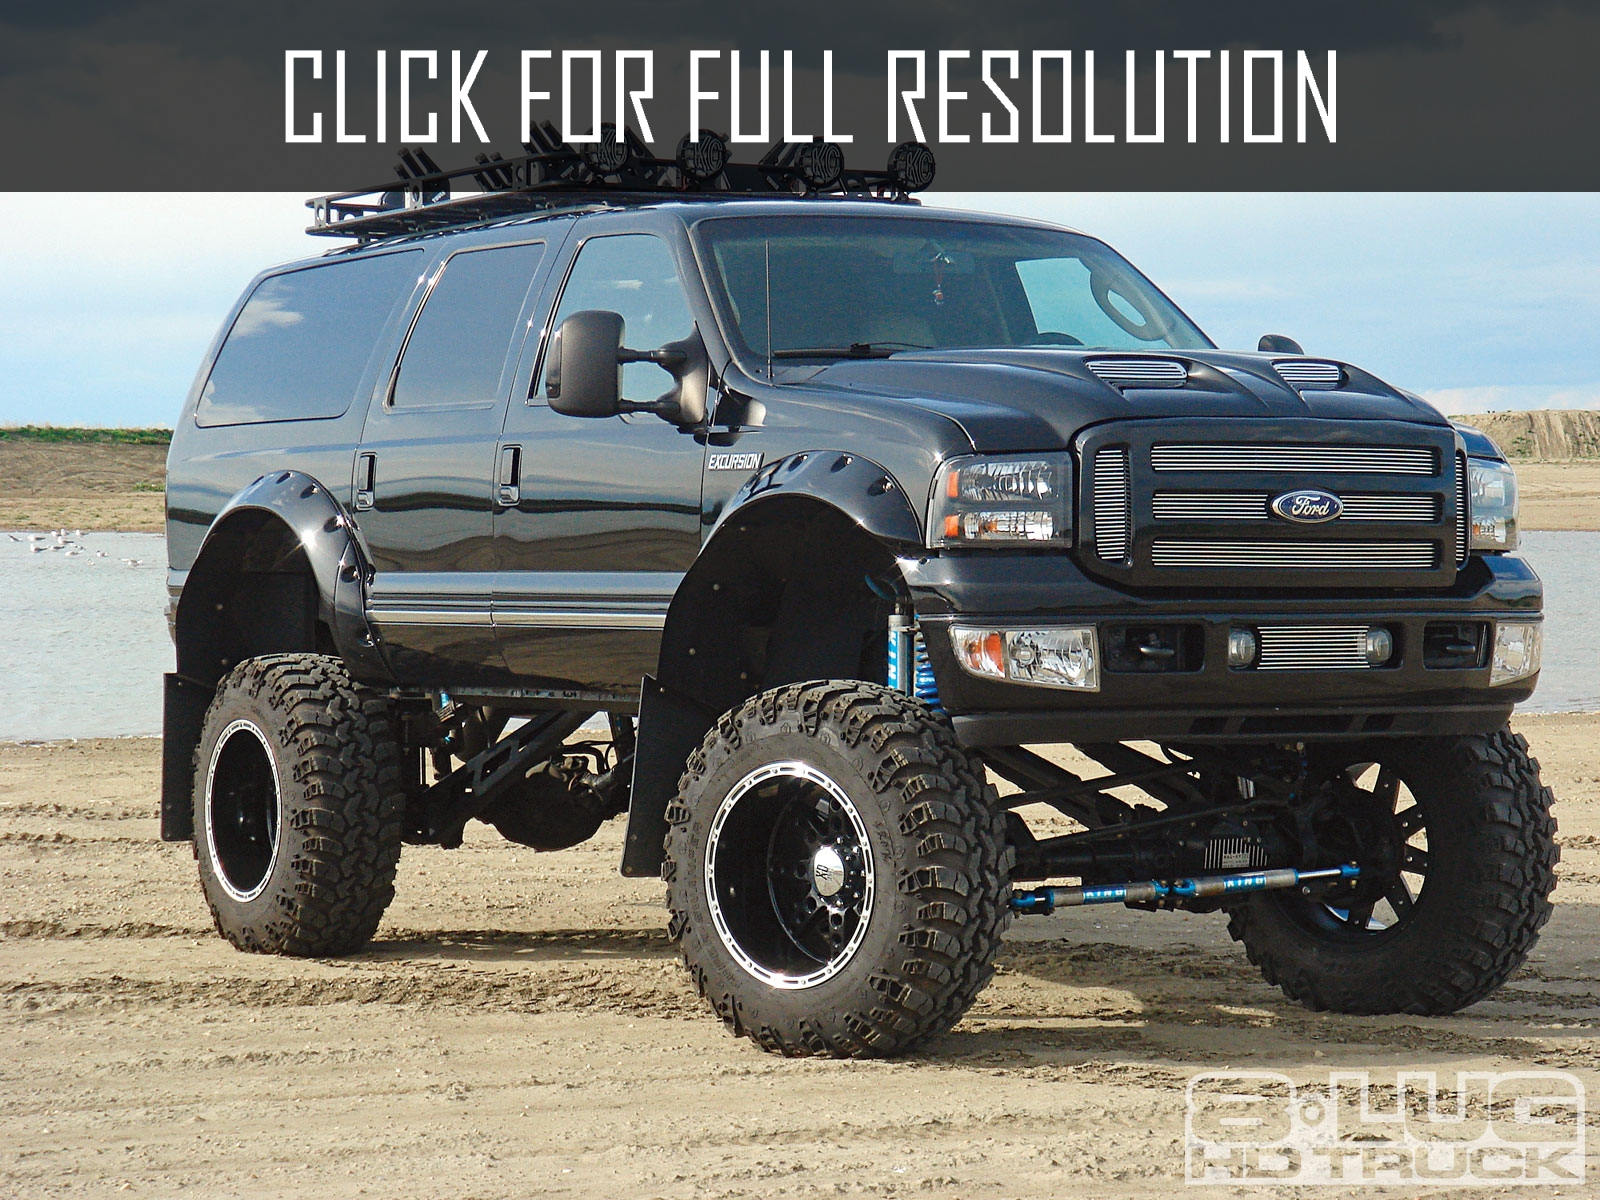 05 Ford Excursion Diesel Best Image Gallery 9 13 Share And Download